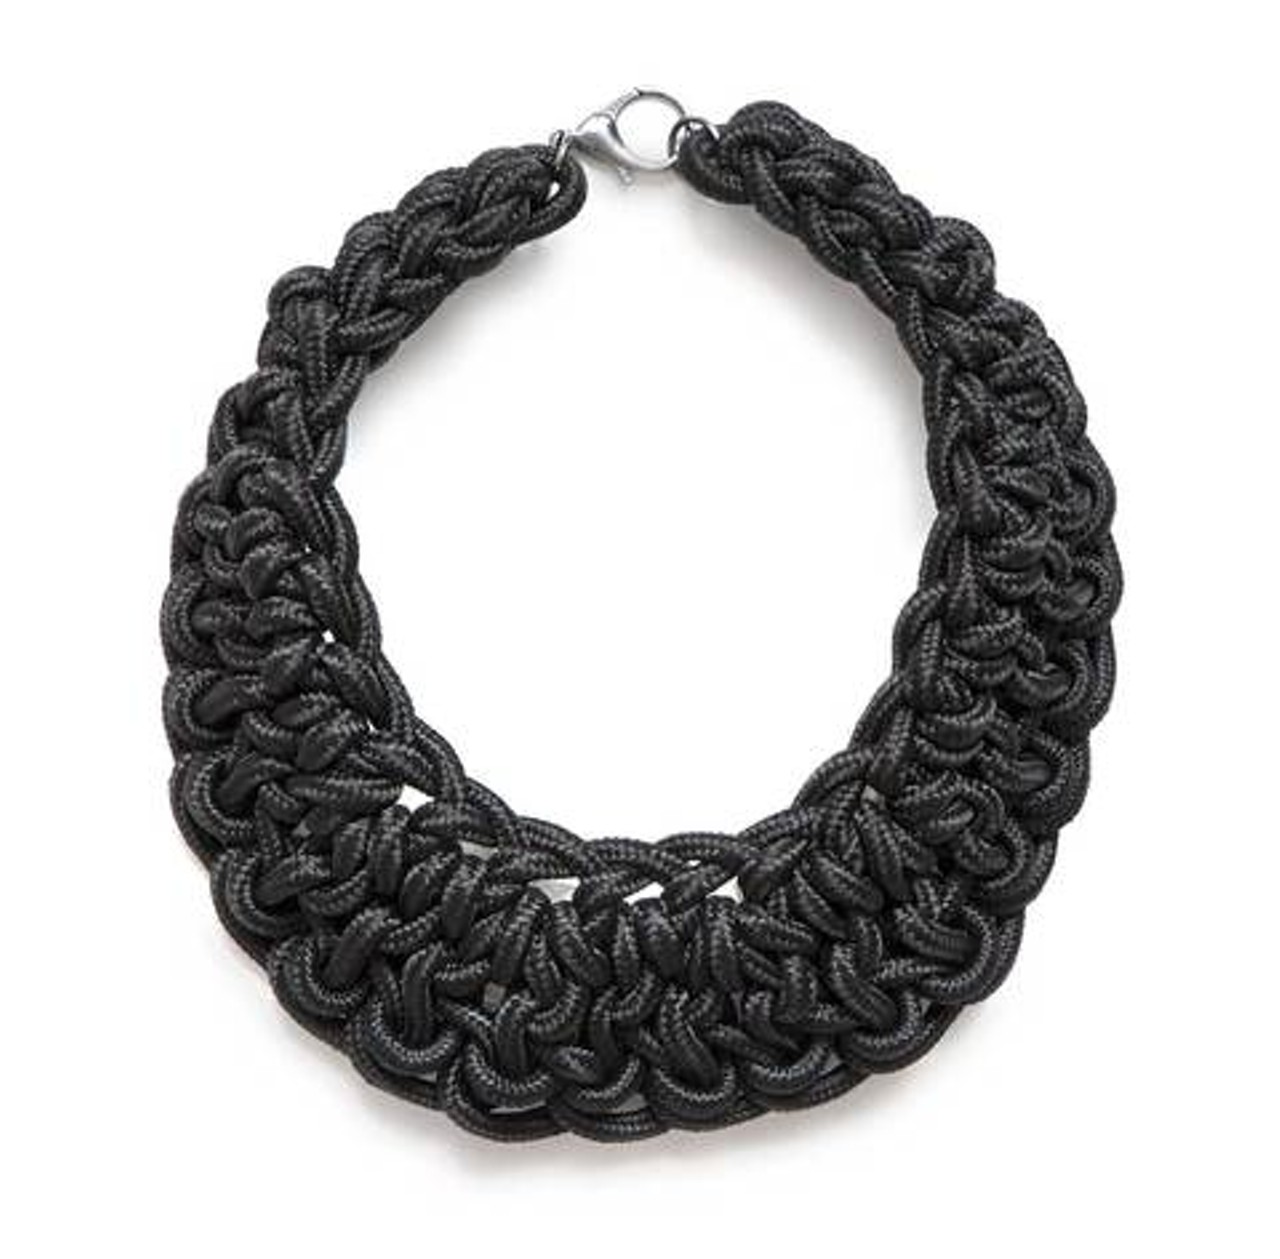 Exaggerated knotted rope necklace, $36.